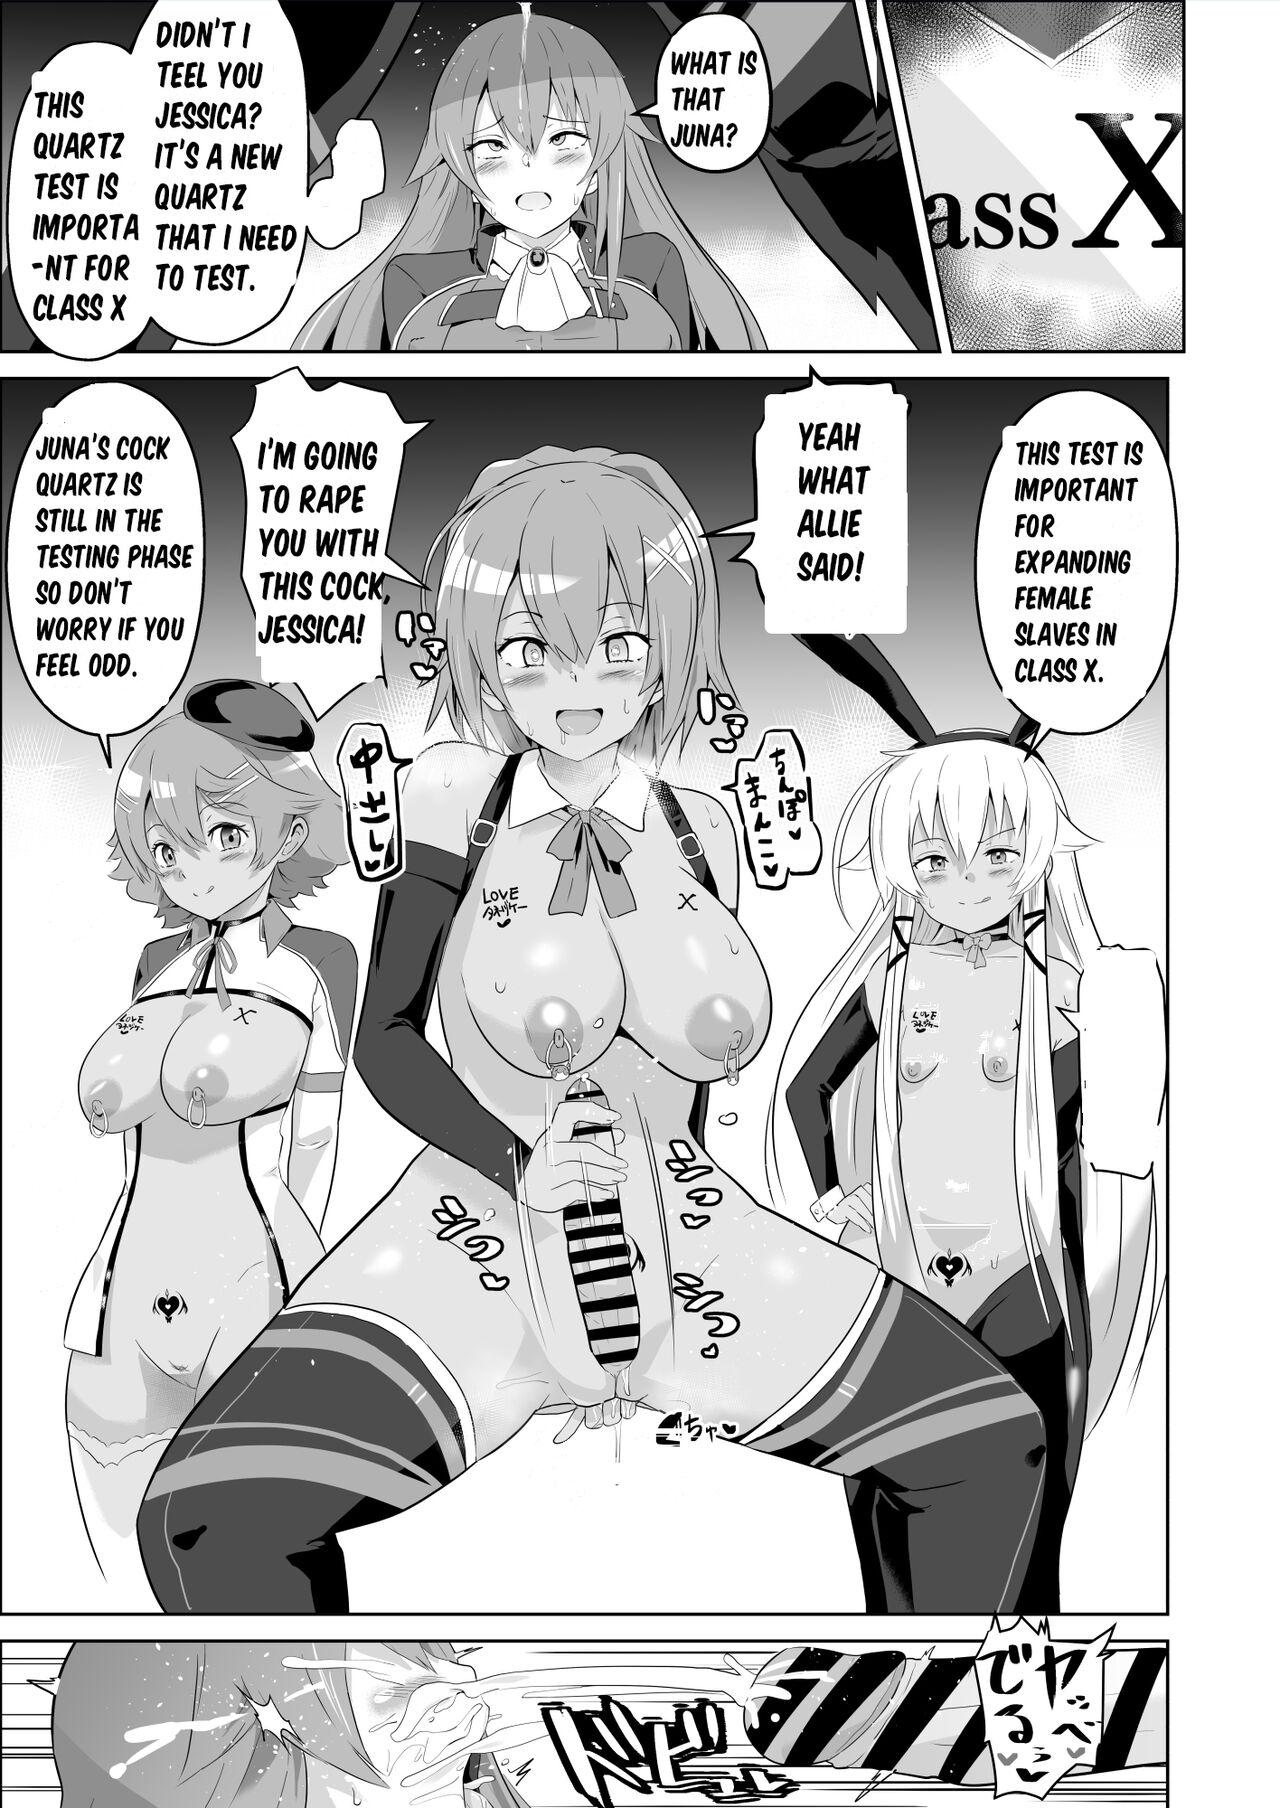 Hot Girl Fucking Hypnosis of the New Class VII - Aftermath - The legend of heroes | eiyuu densetsu Hot Girl Fucking - Page 1